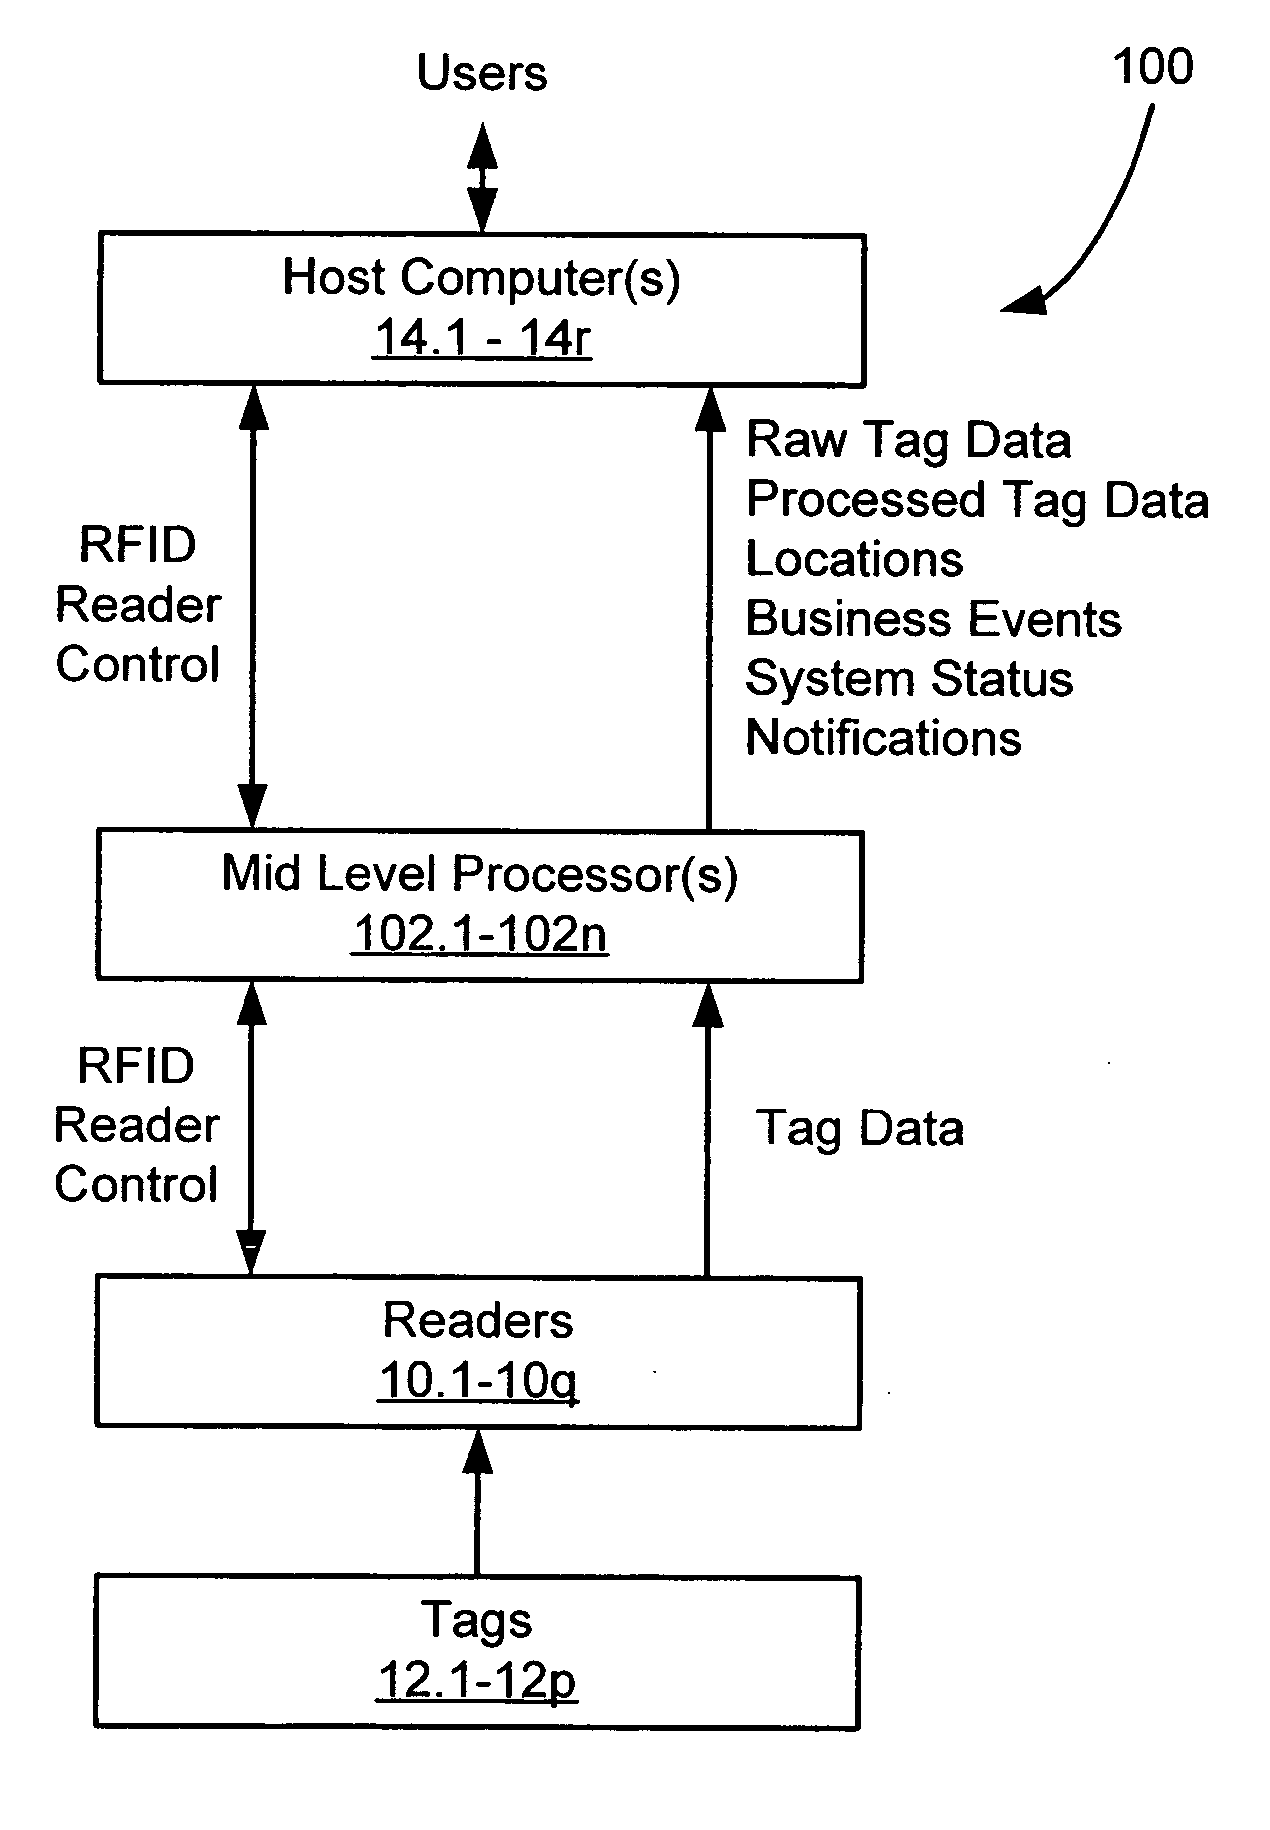 Interference monitoring in an RFID system